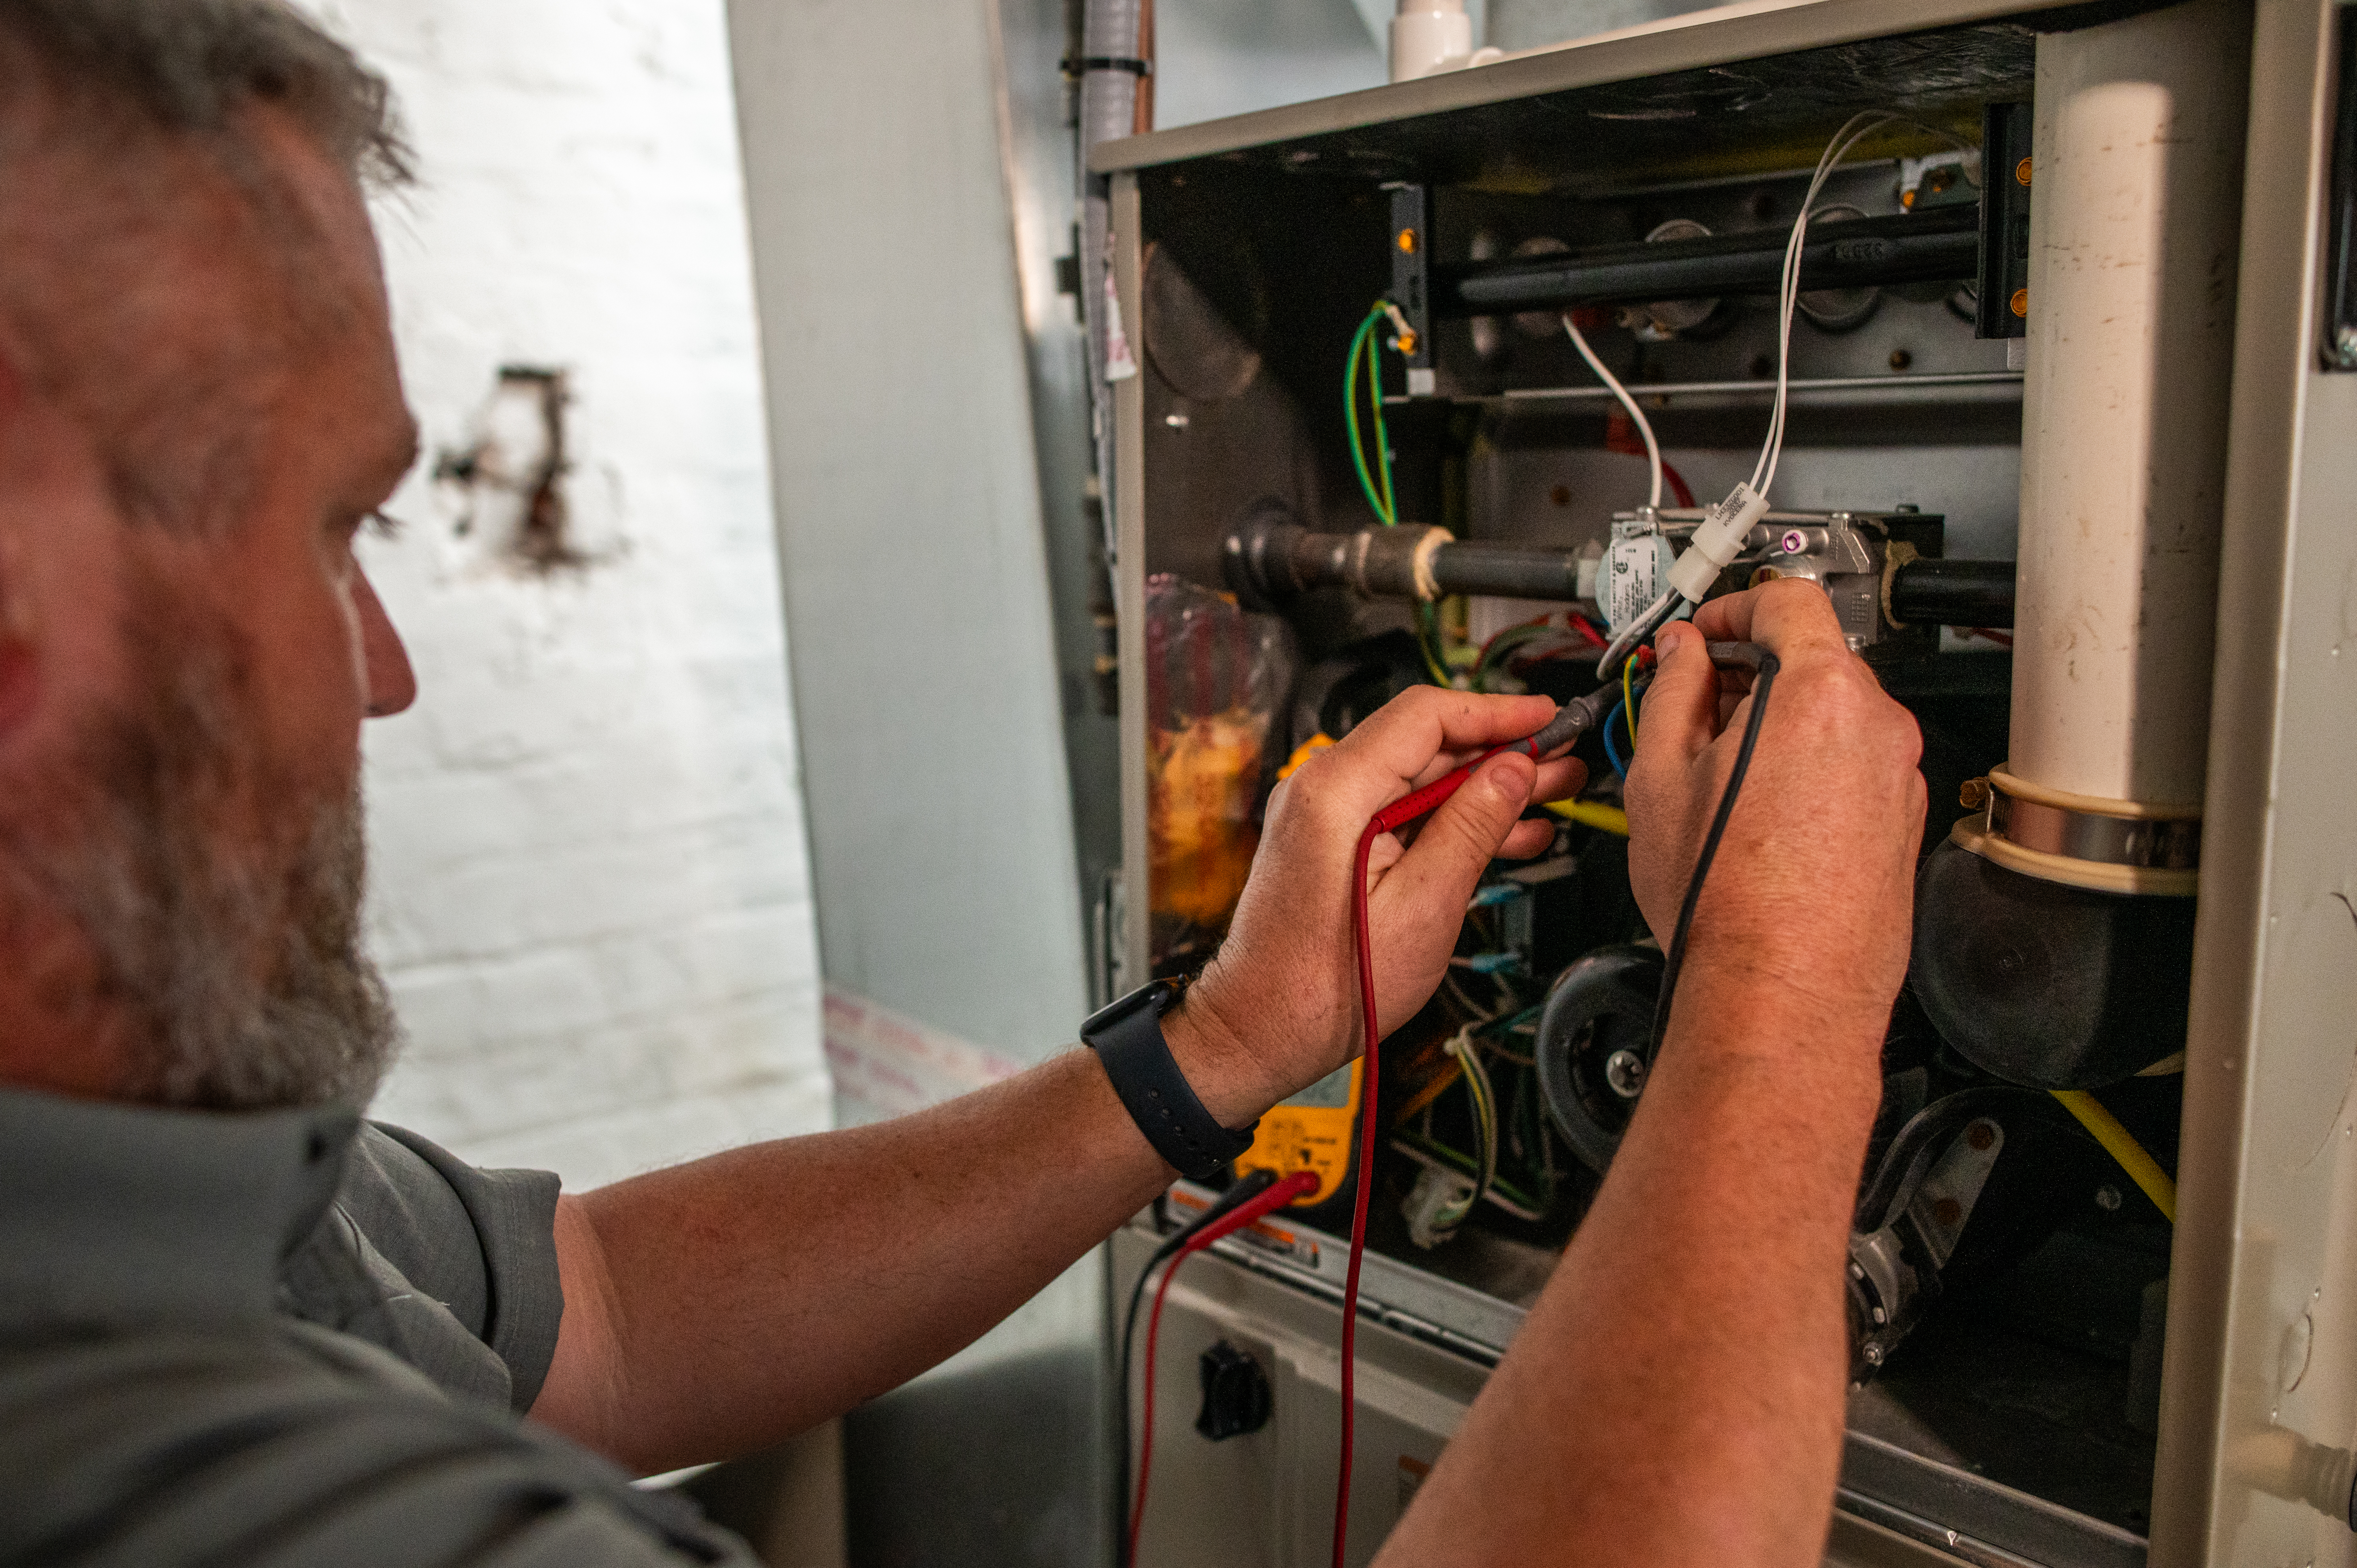 How to fix a furnace that won't turn off